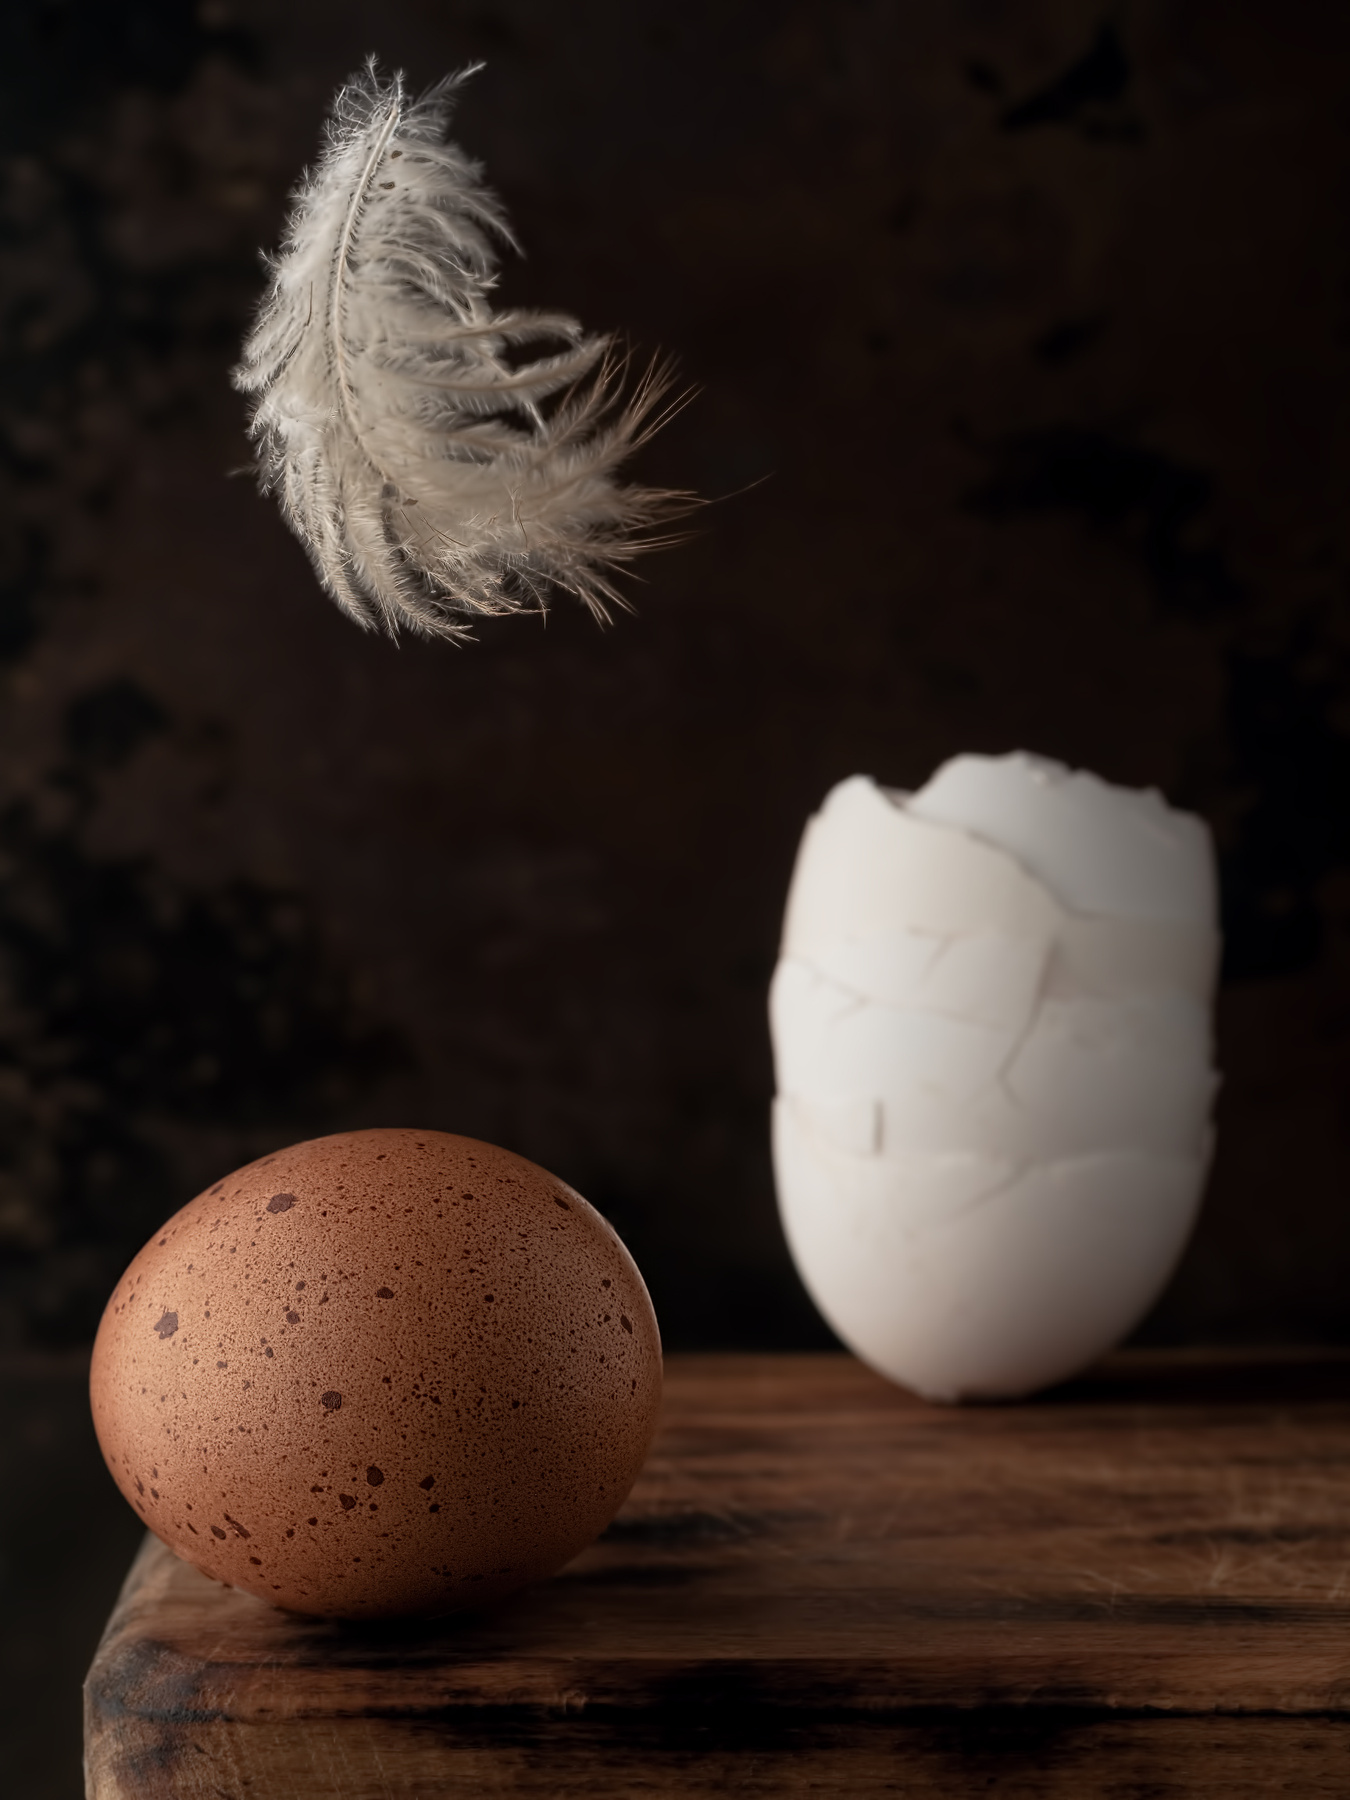 egg egg shell food background concept protein breakfast chicken eggshell fragile healthy ingredient life single natural organic half color white farm object cooking crack brown easter diet broken nobody product nutritious nature calorie raw poultry yellow fre